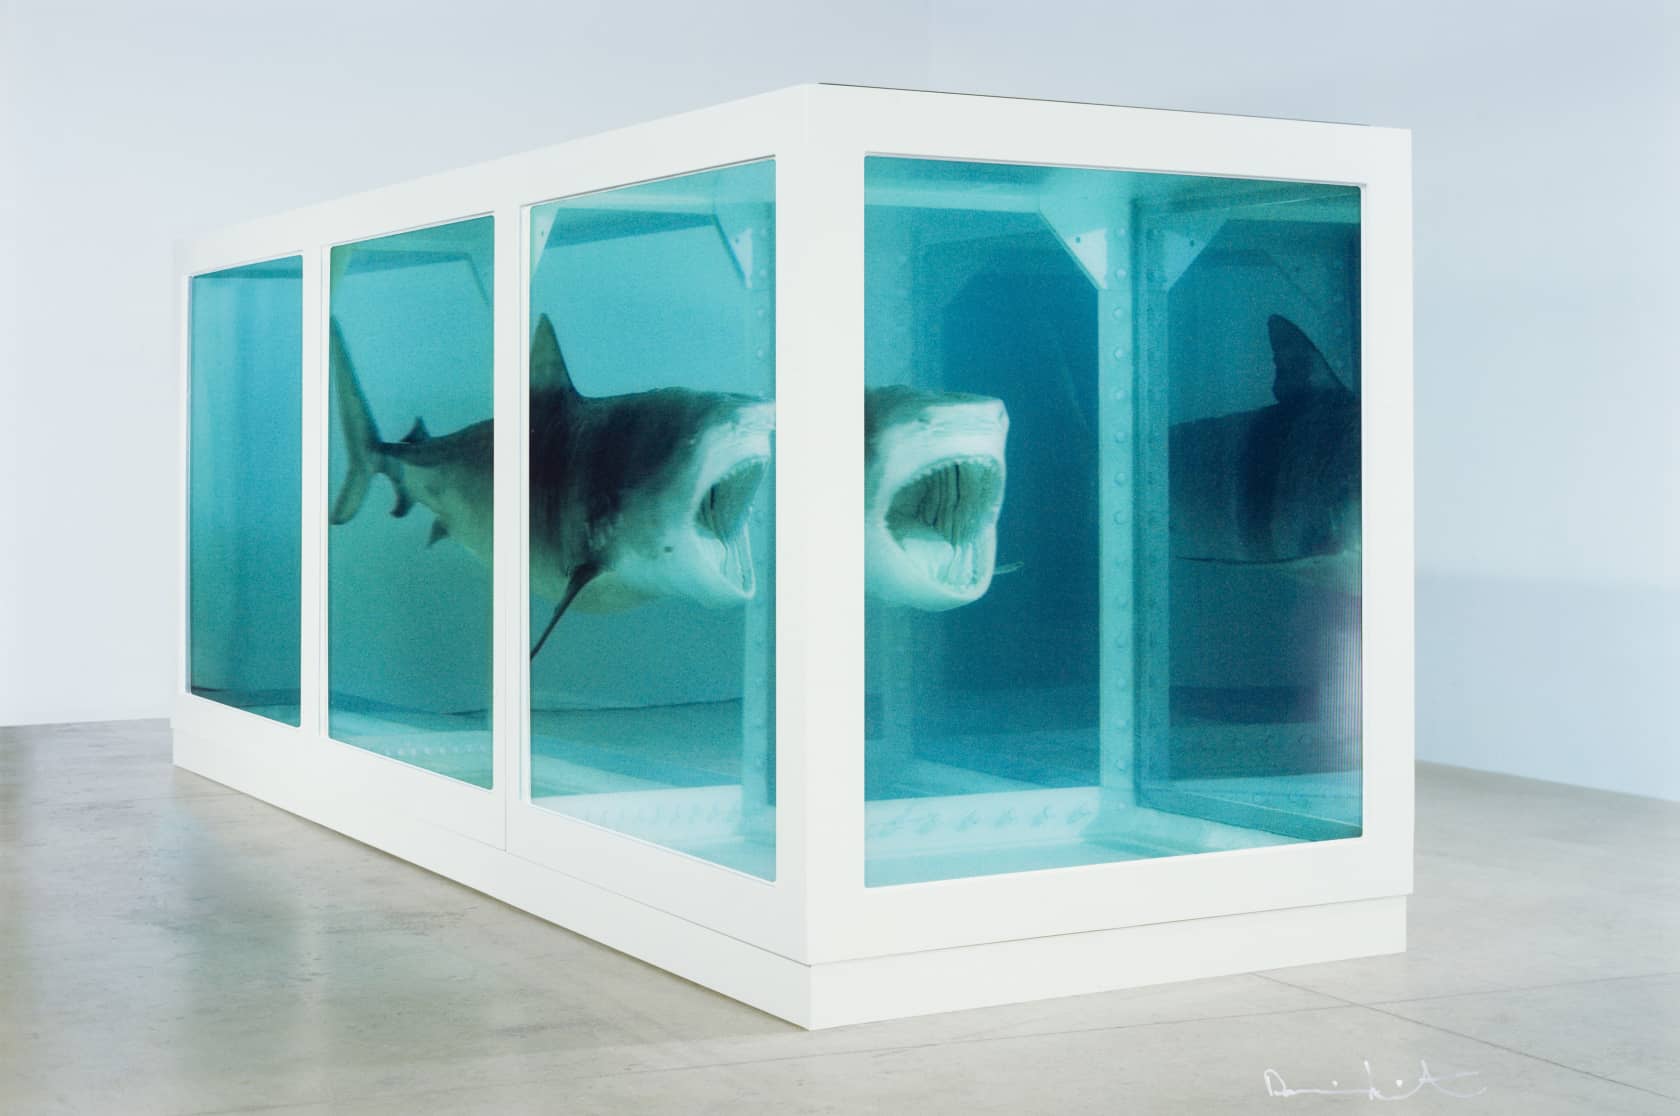 Damien Hirst, Physical Impossibility of Death in the Mind of Someone Living, 2013